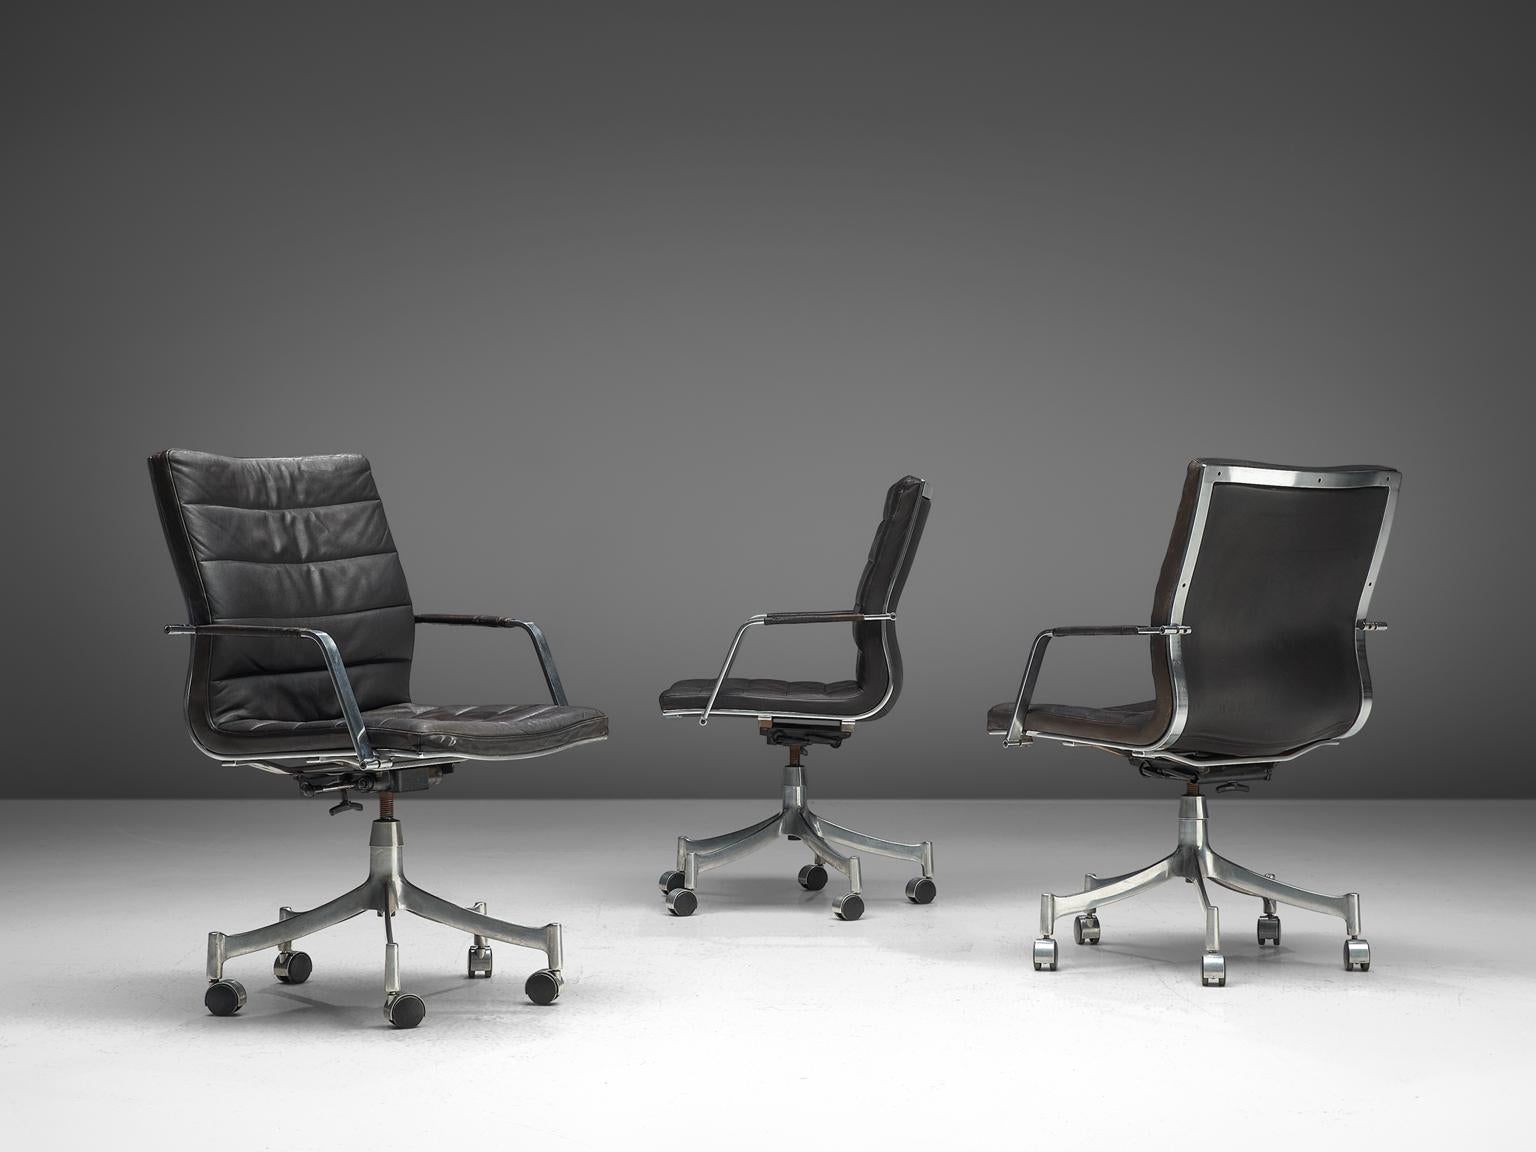 Jørgen Lund & Ole Larsen for Bo-Ex, set of three office chairs model BO-854, in leather and metal, Denmark, 1960s.

Modern office chairs in dark brown leather and brushed metal frame. These swivel chairs show great elegance. The five-legged base